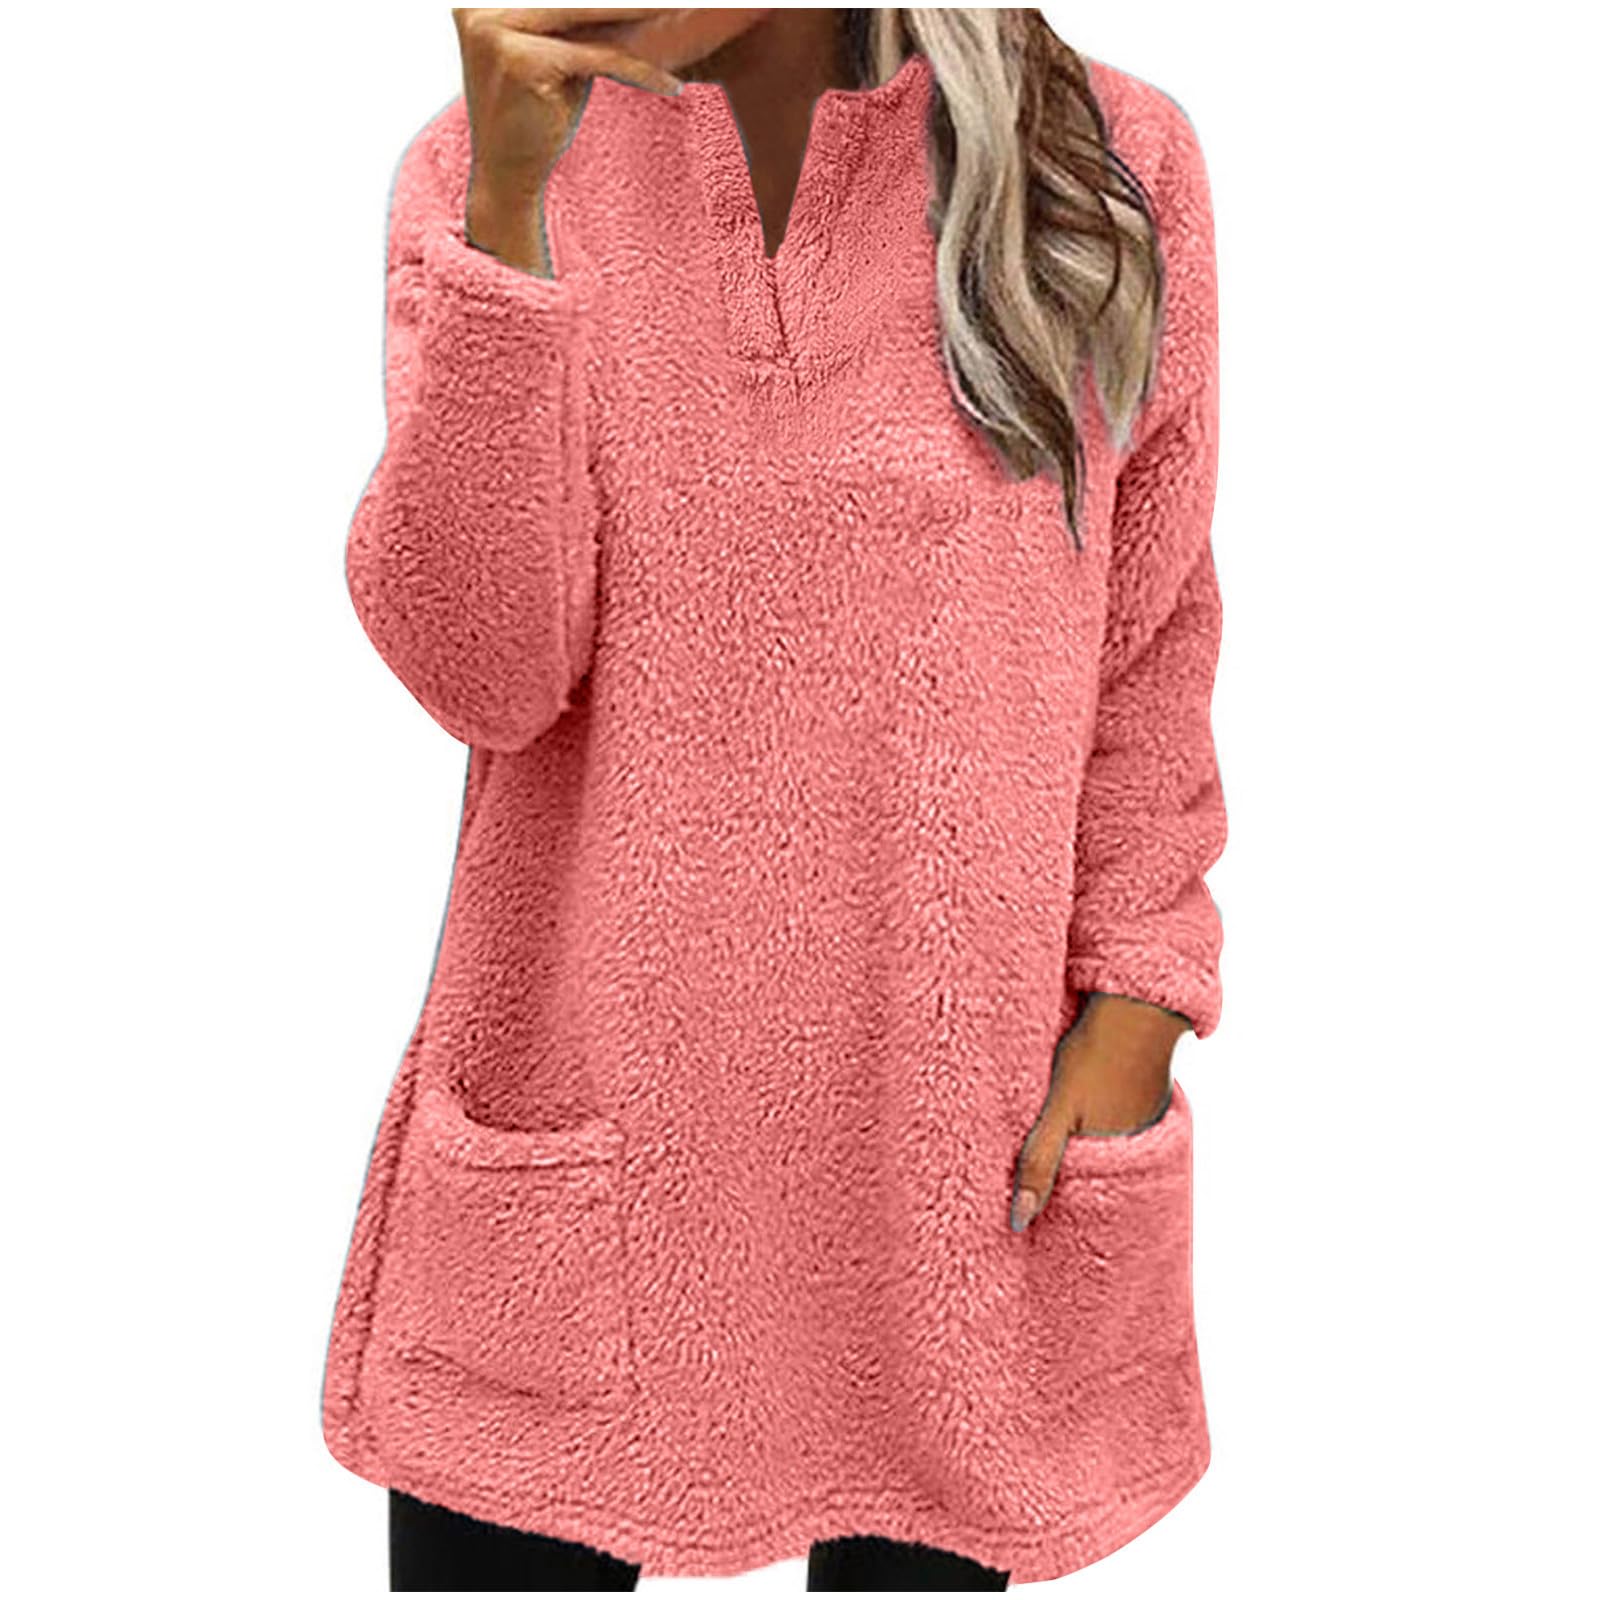 AMhomely Ladies Womens Soft Teddy Fleece Hooded Jumper Plus Size Double  Fleece Casual Hoodies With Pocket V Neck Soft Fleece Hooded Sweatshirts  Plain Pullover Tops Winter Lightweight Lounge Tops 03 Pink XXL